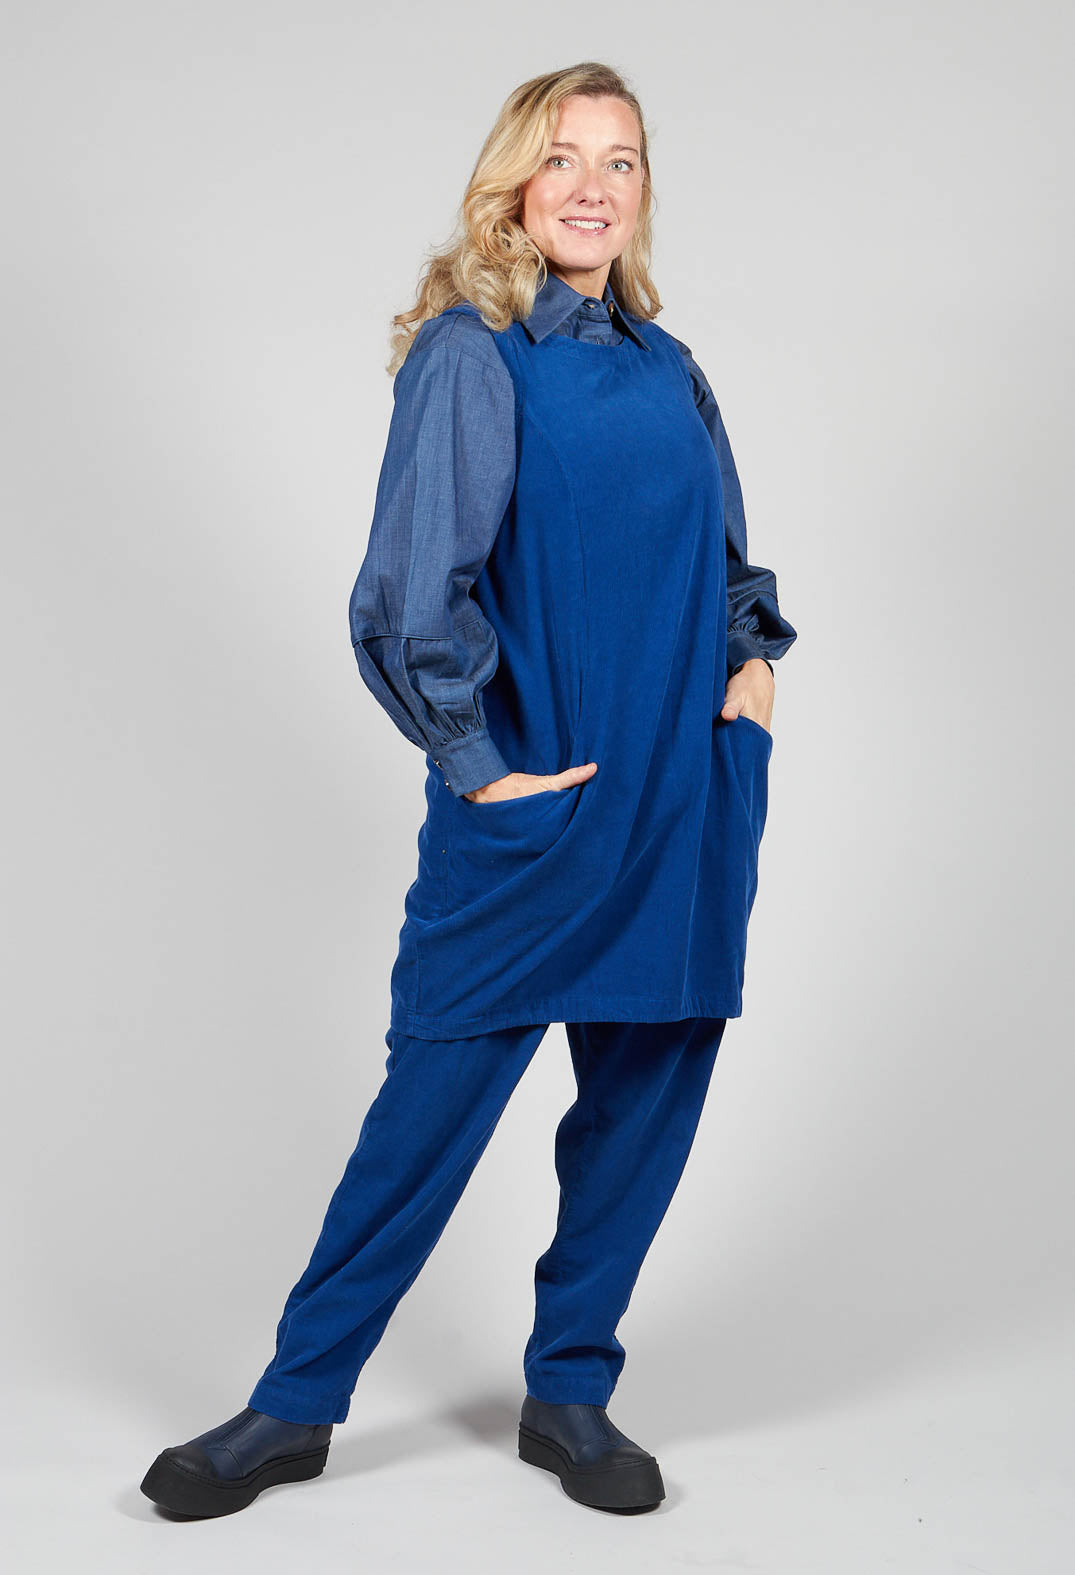 Cassandria Blouse in Chambray Blue